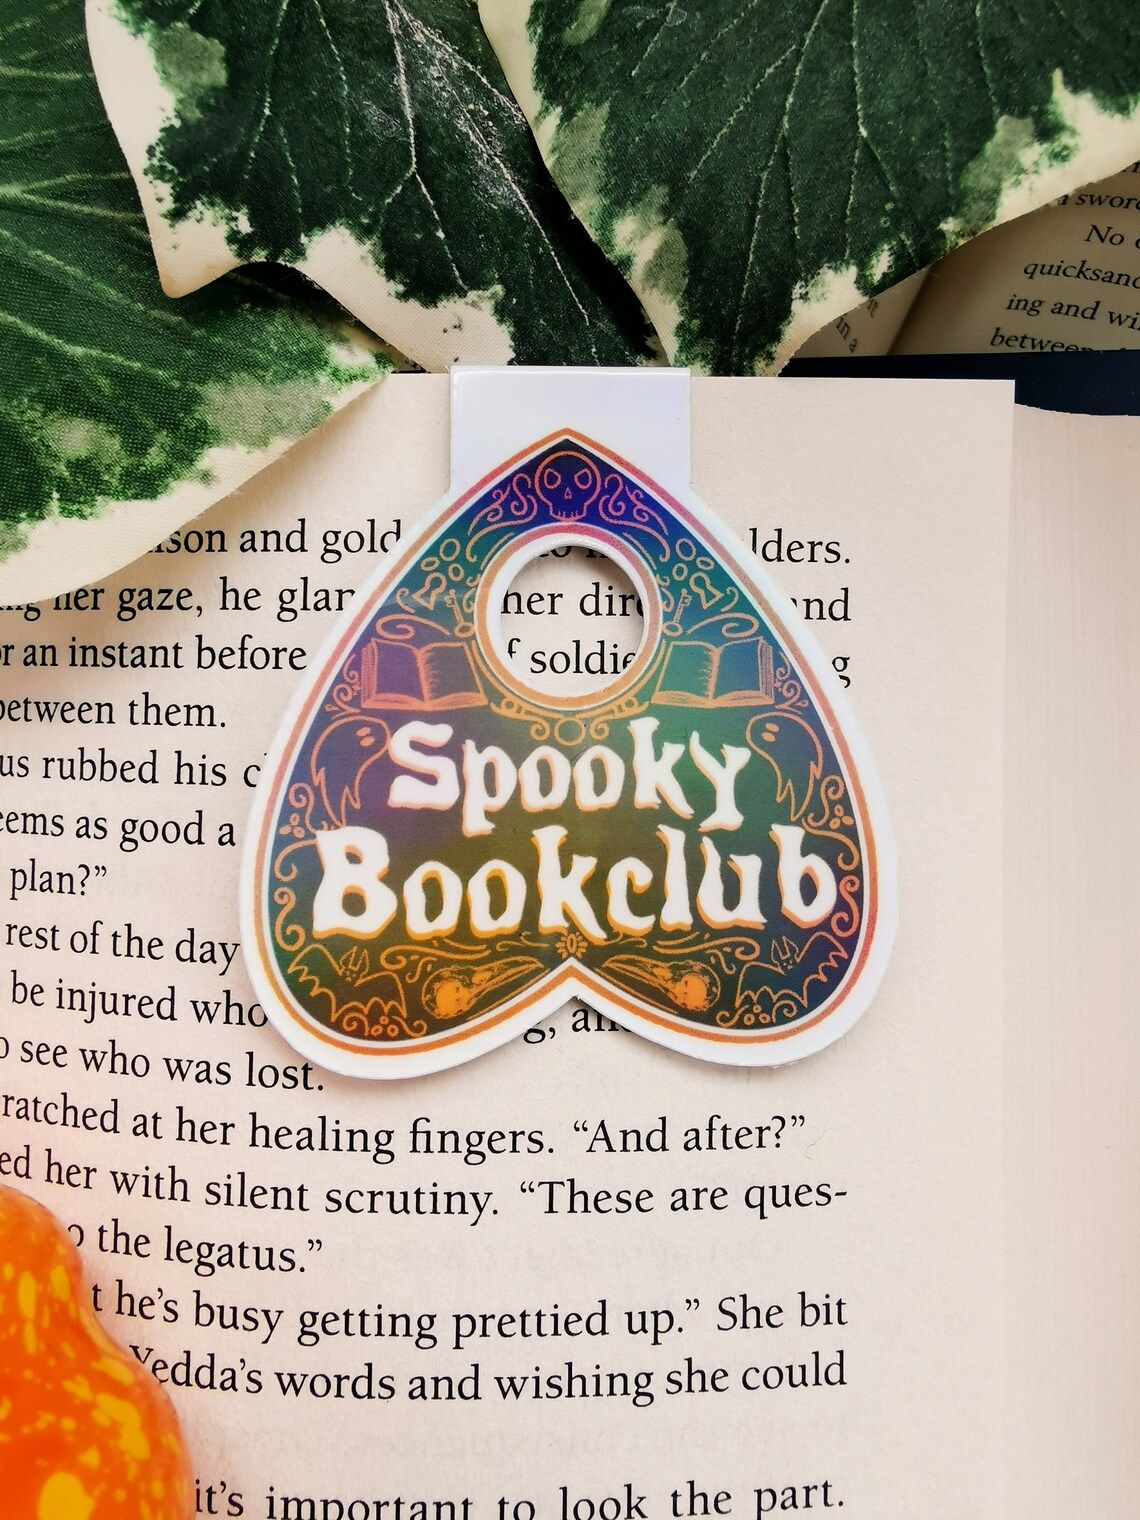 Image of a planchette bookmark with the words "spooky book club."